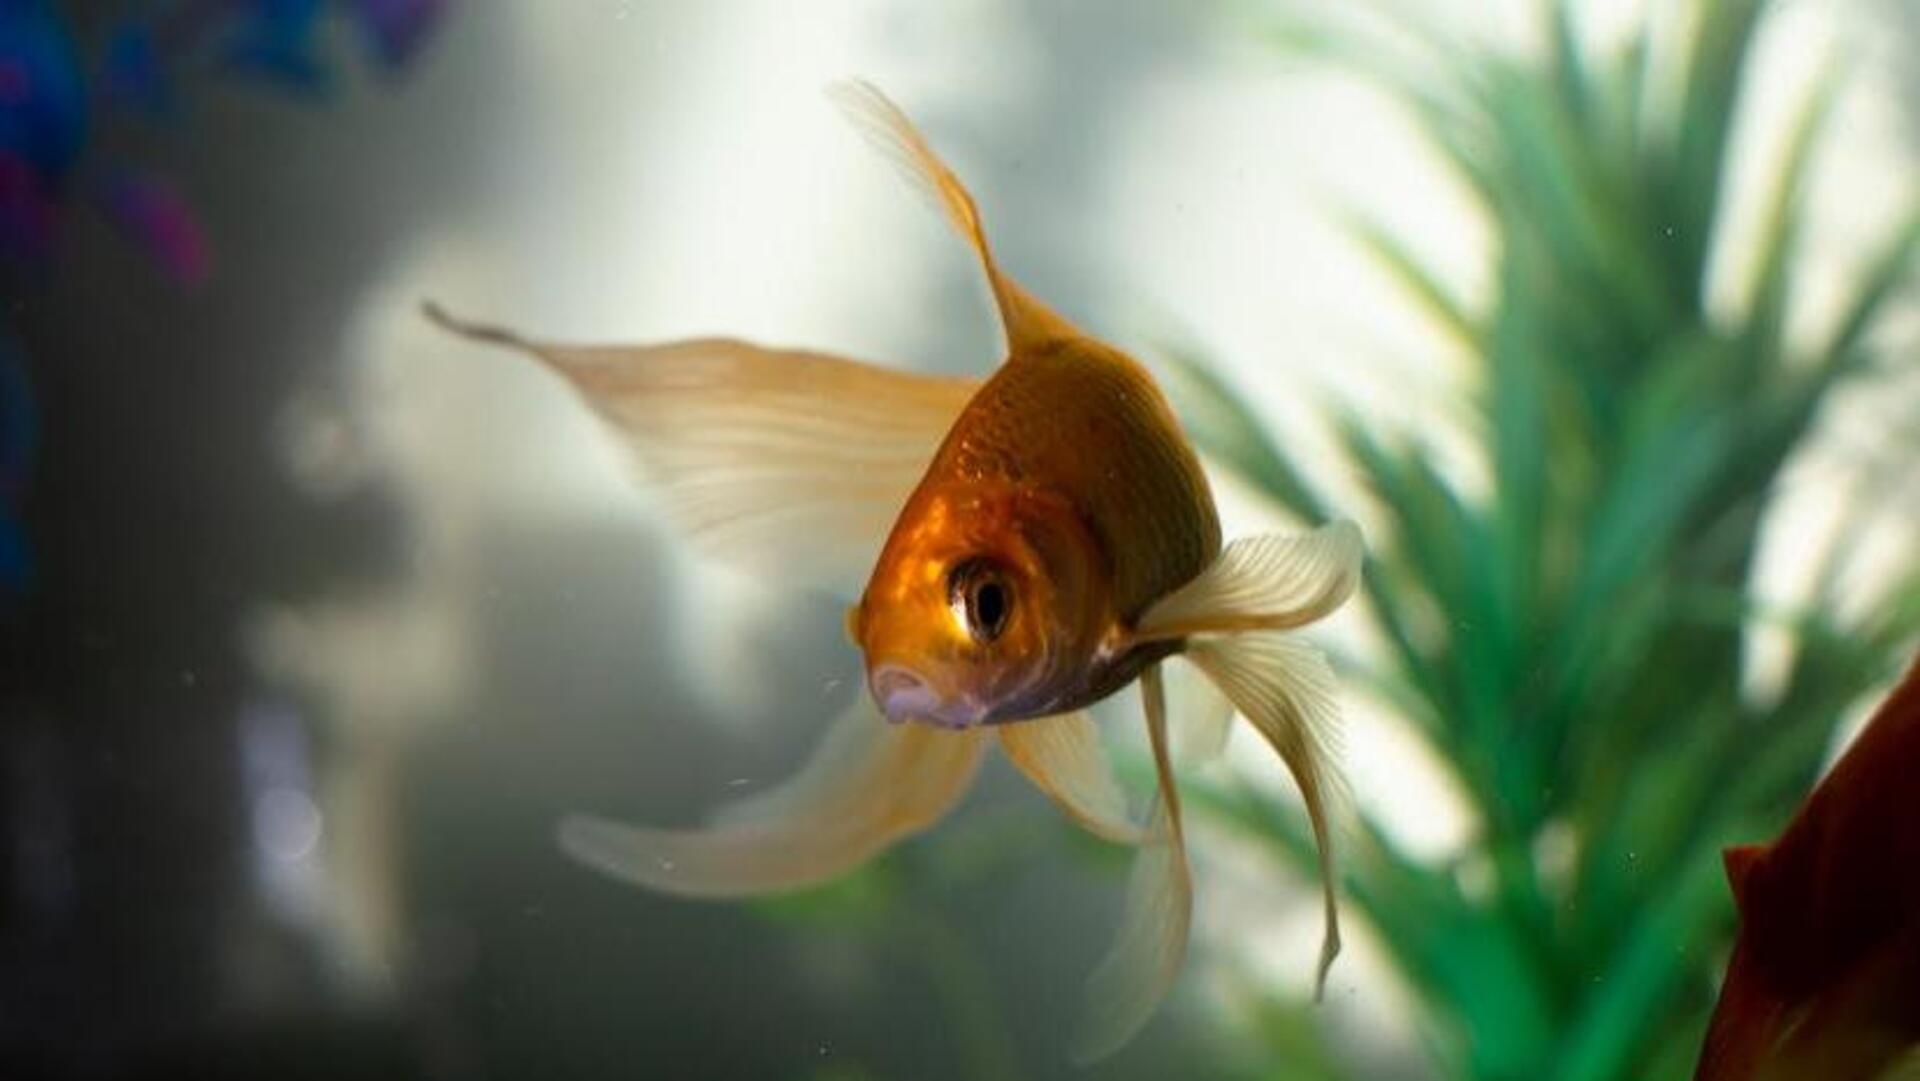 Aquarium at home? Avoid these mistakes